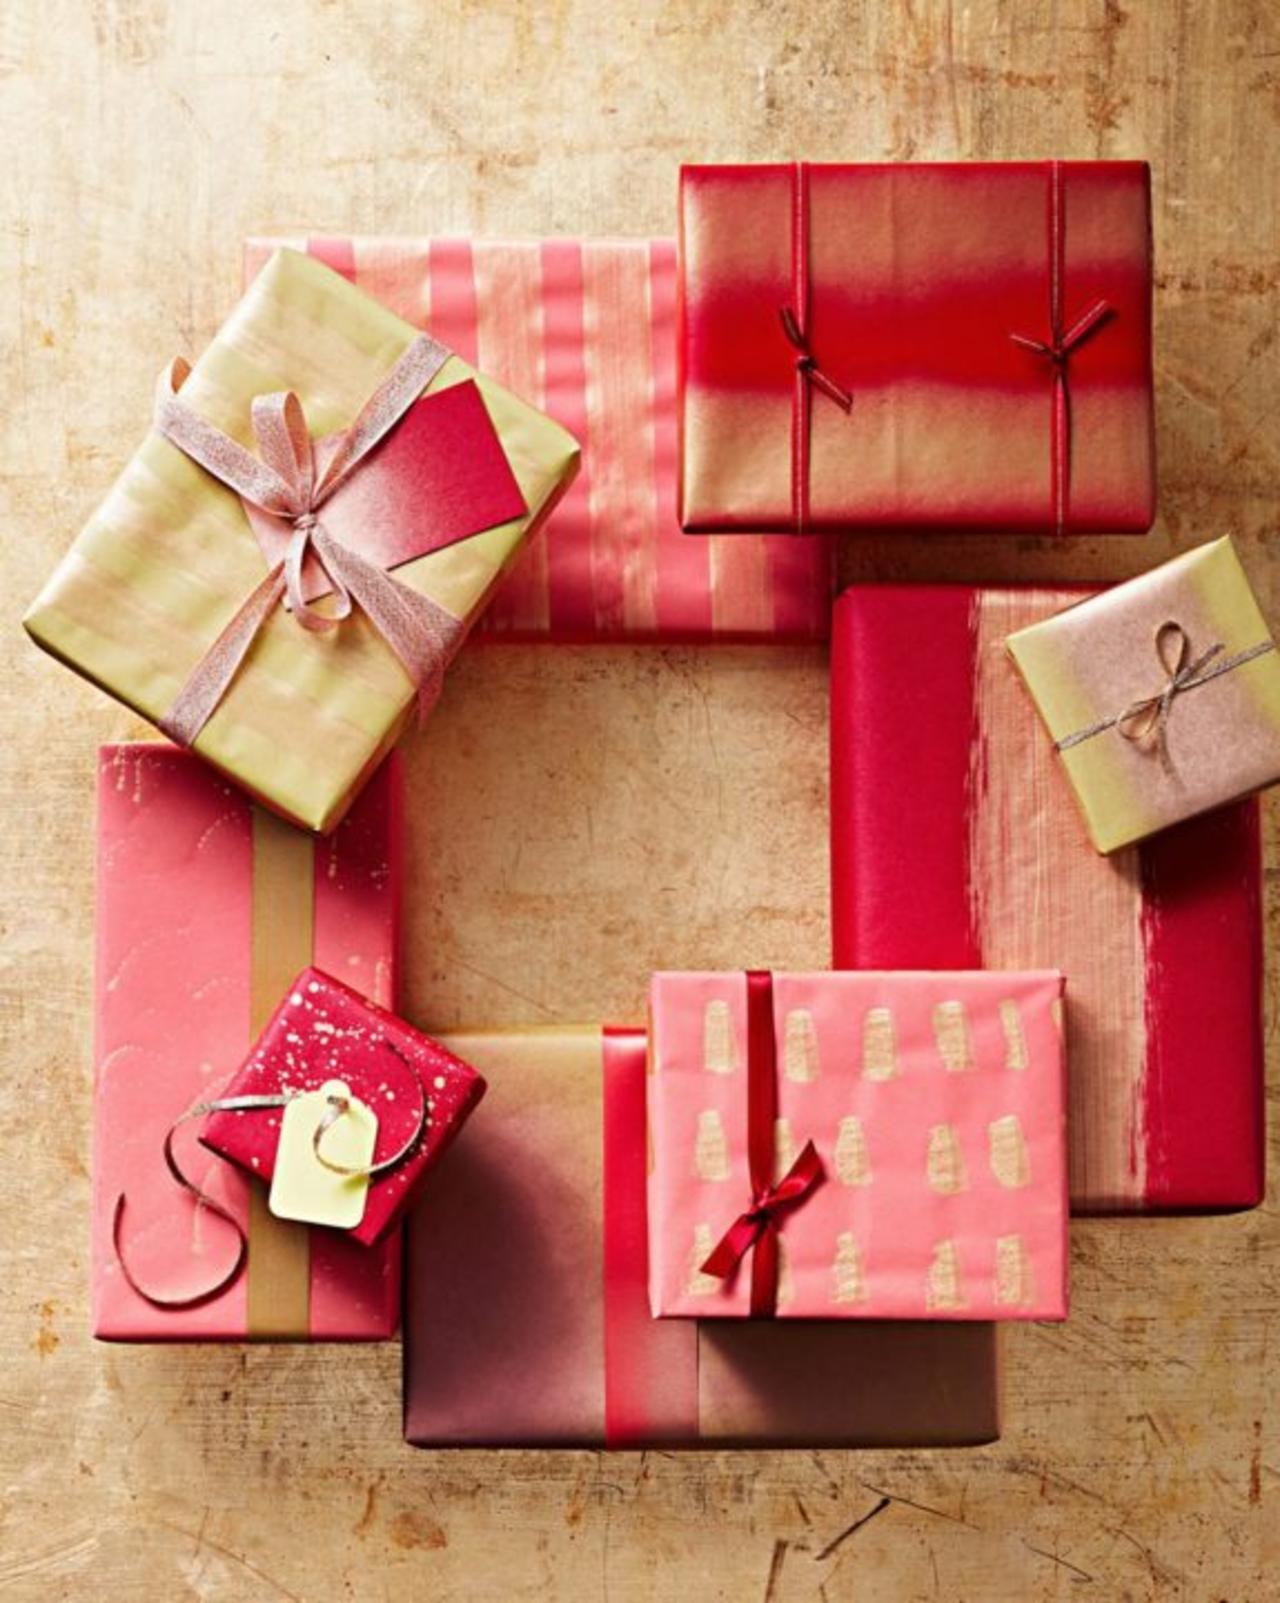 Four Ways to Recycle—or Reuse—All That Holiday Wrapping Paper